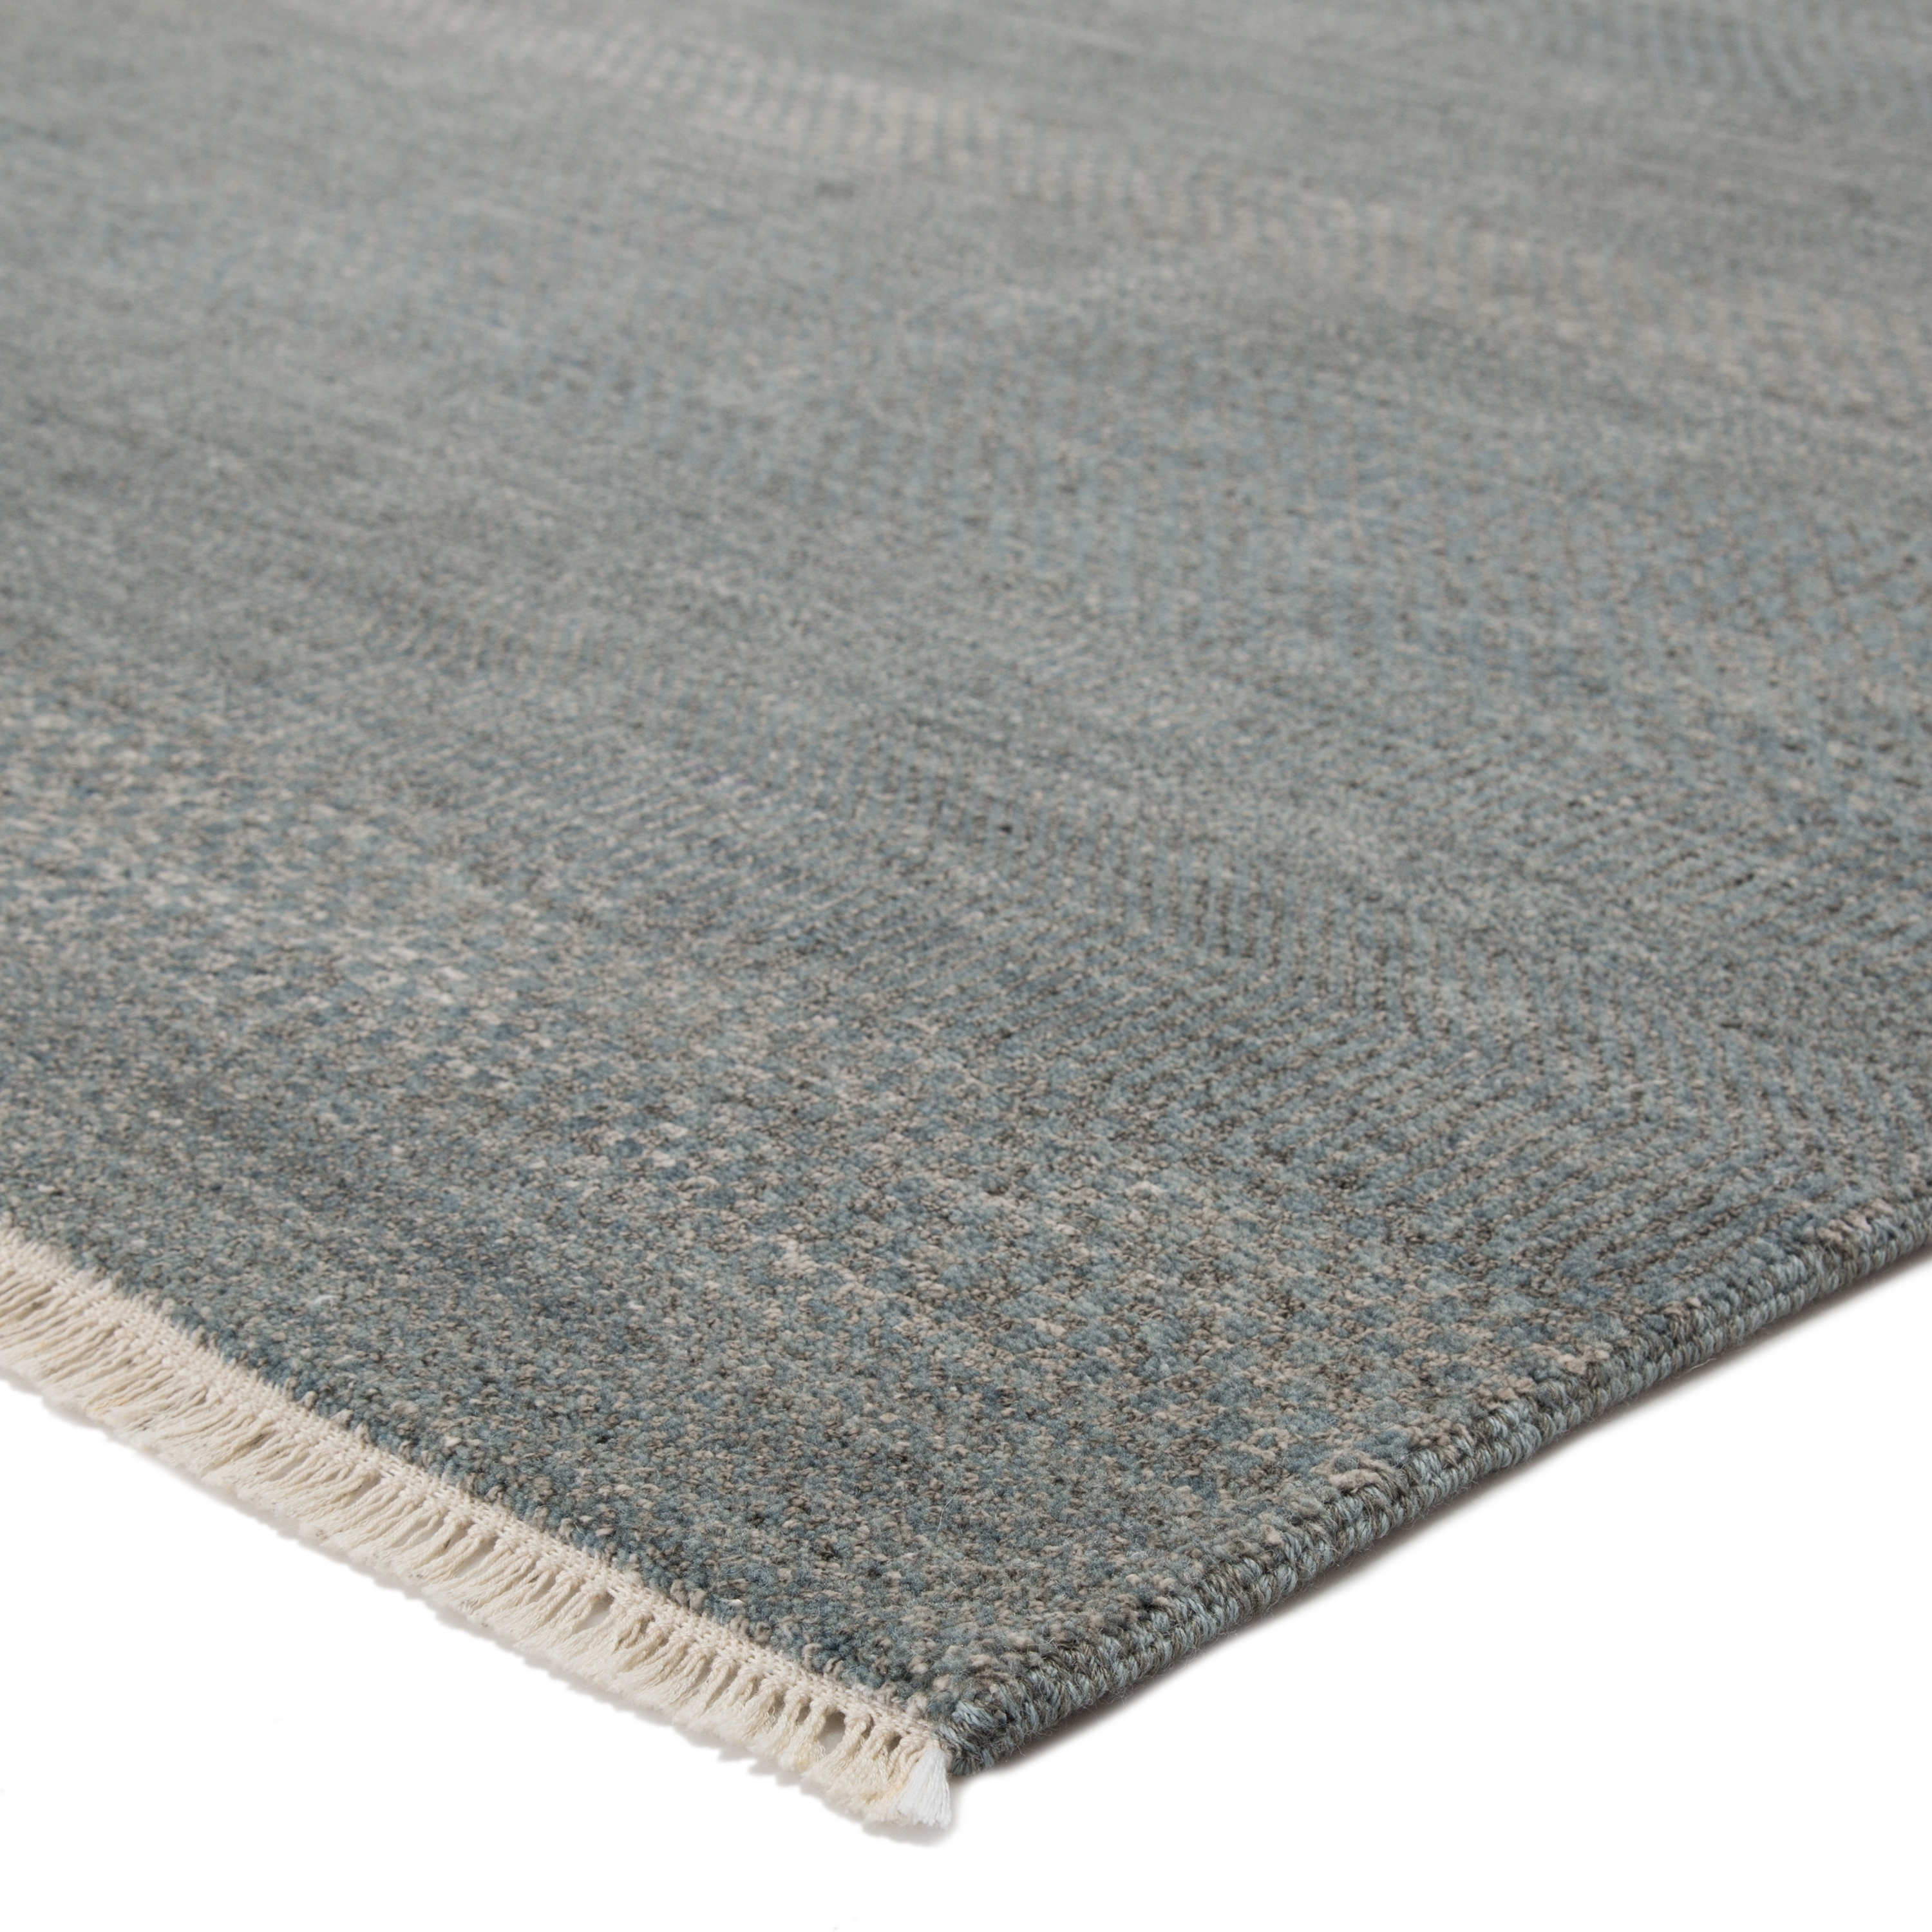 Irminio Hand-Knotted Geomteric Gray/ Blue Area Rug (9'X12') - Image 1